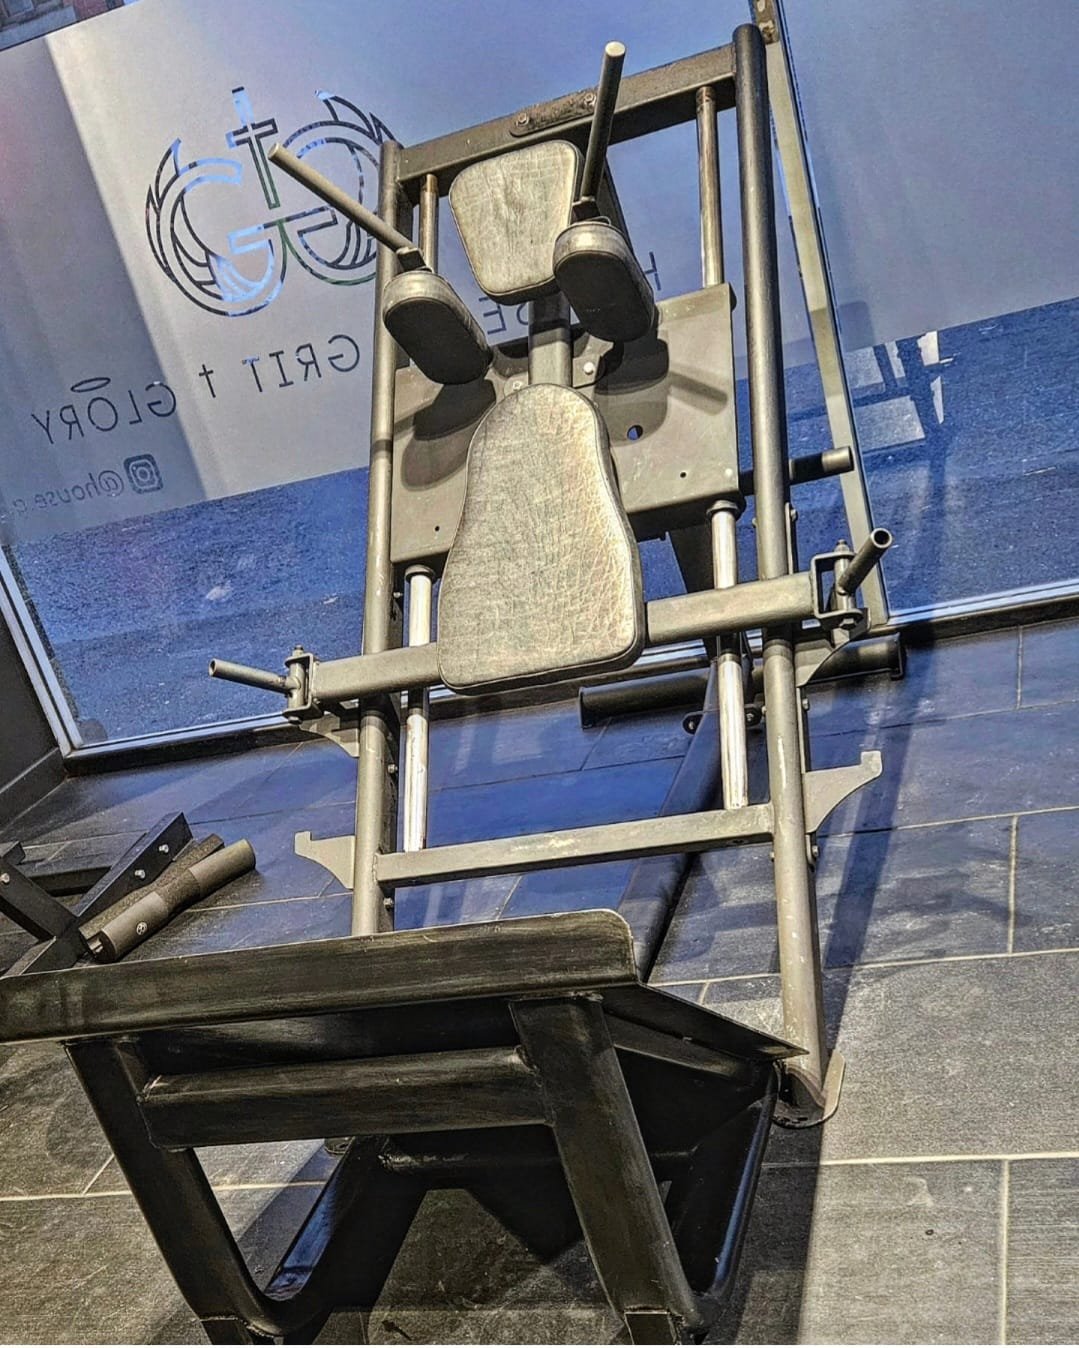 hack squat machine at the house of gg